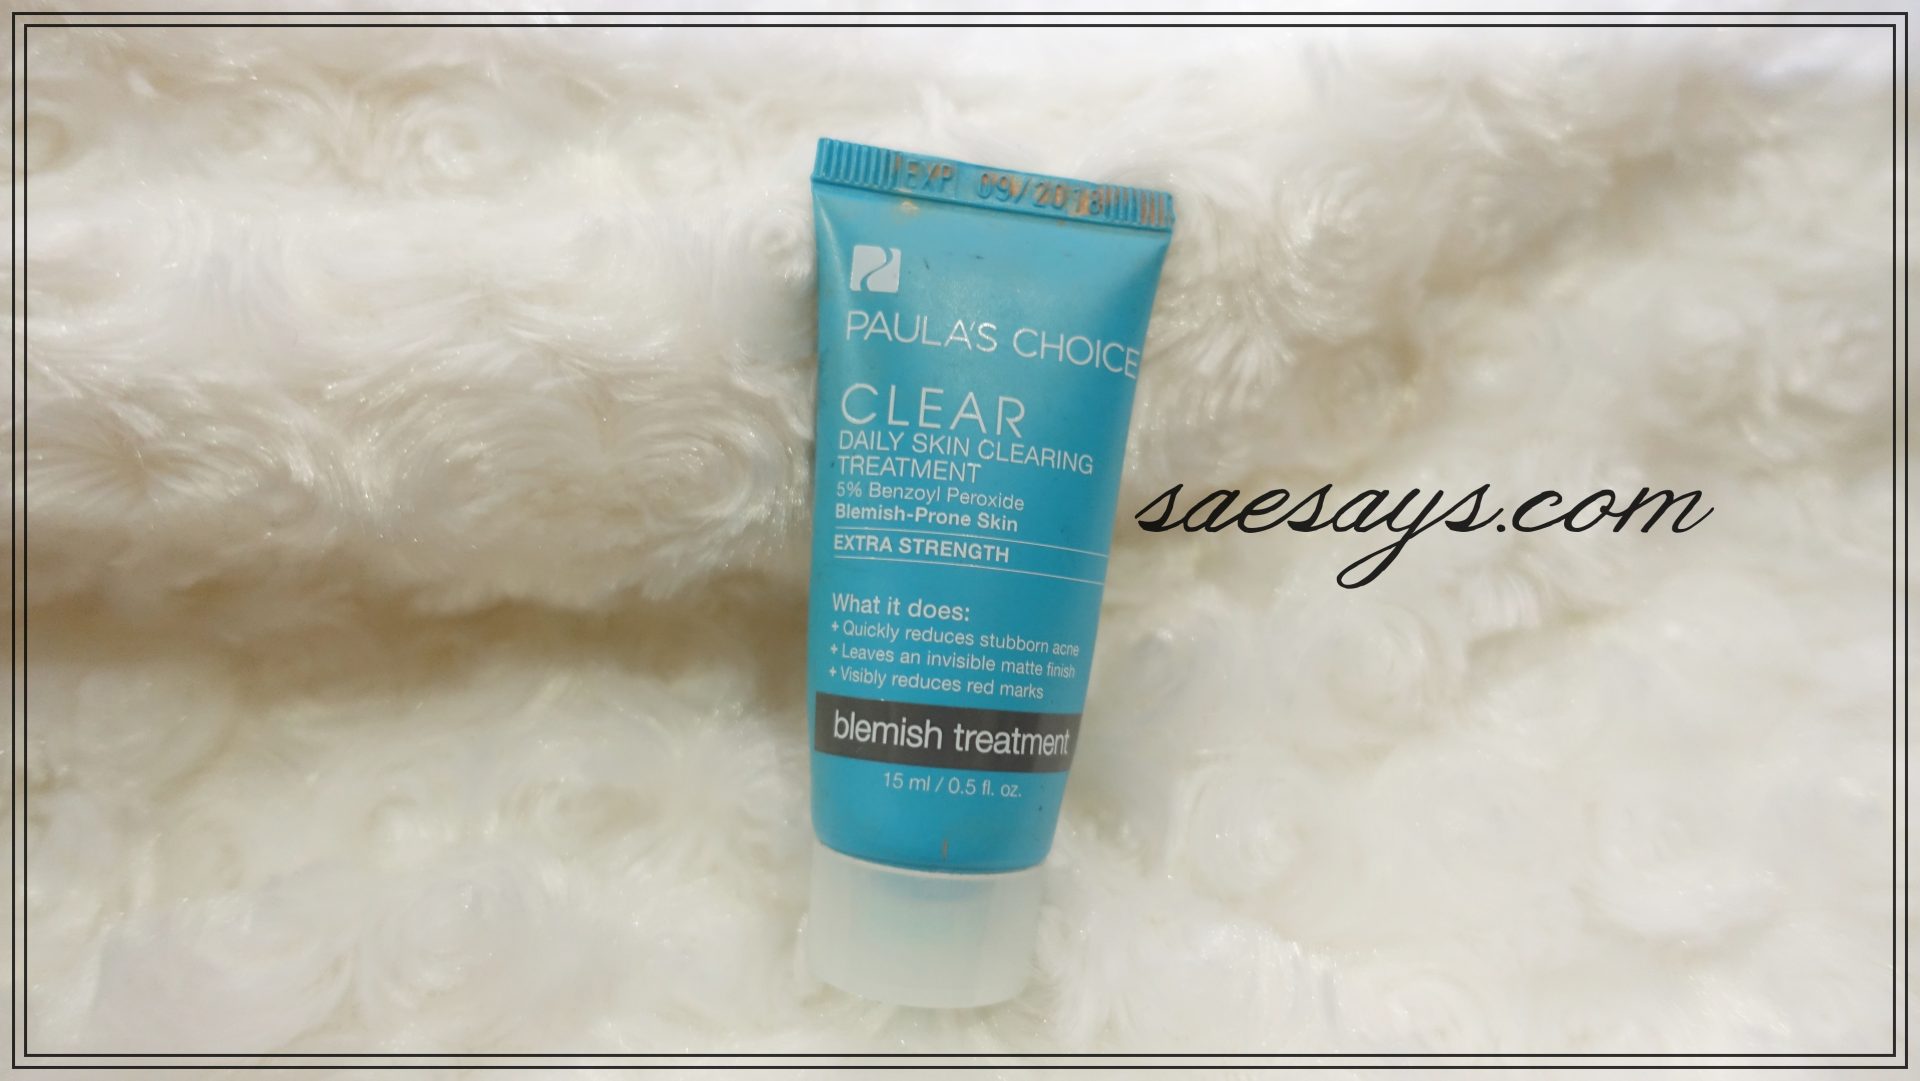 Review: Paula’s Choice CLEAR Extra Strength Daily Skin Clearing Treatment with 5% Benzoyl Peroxide